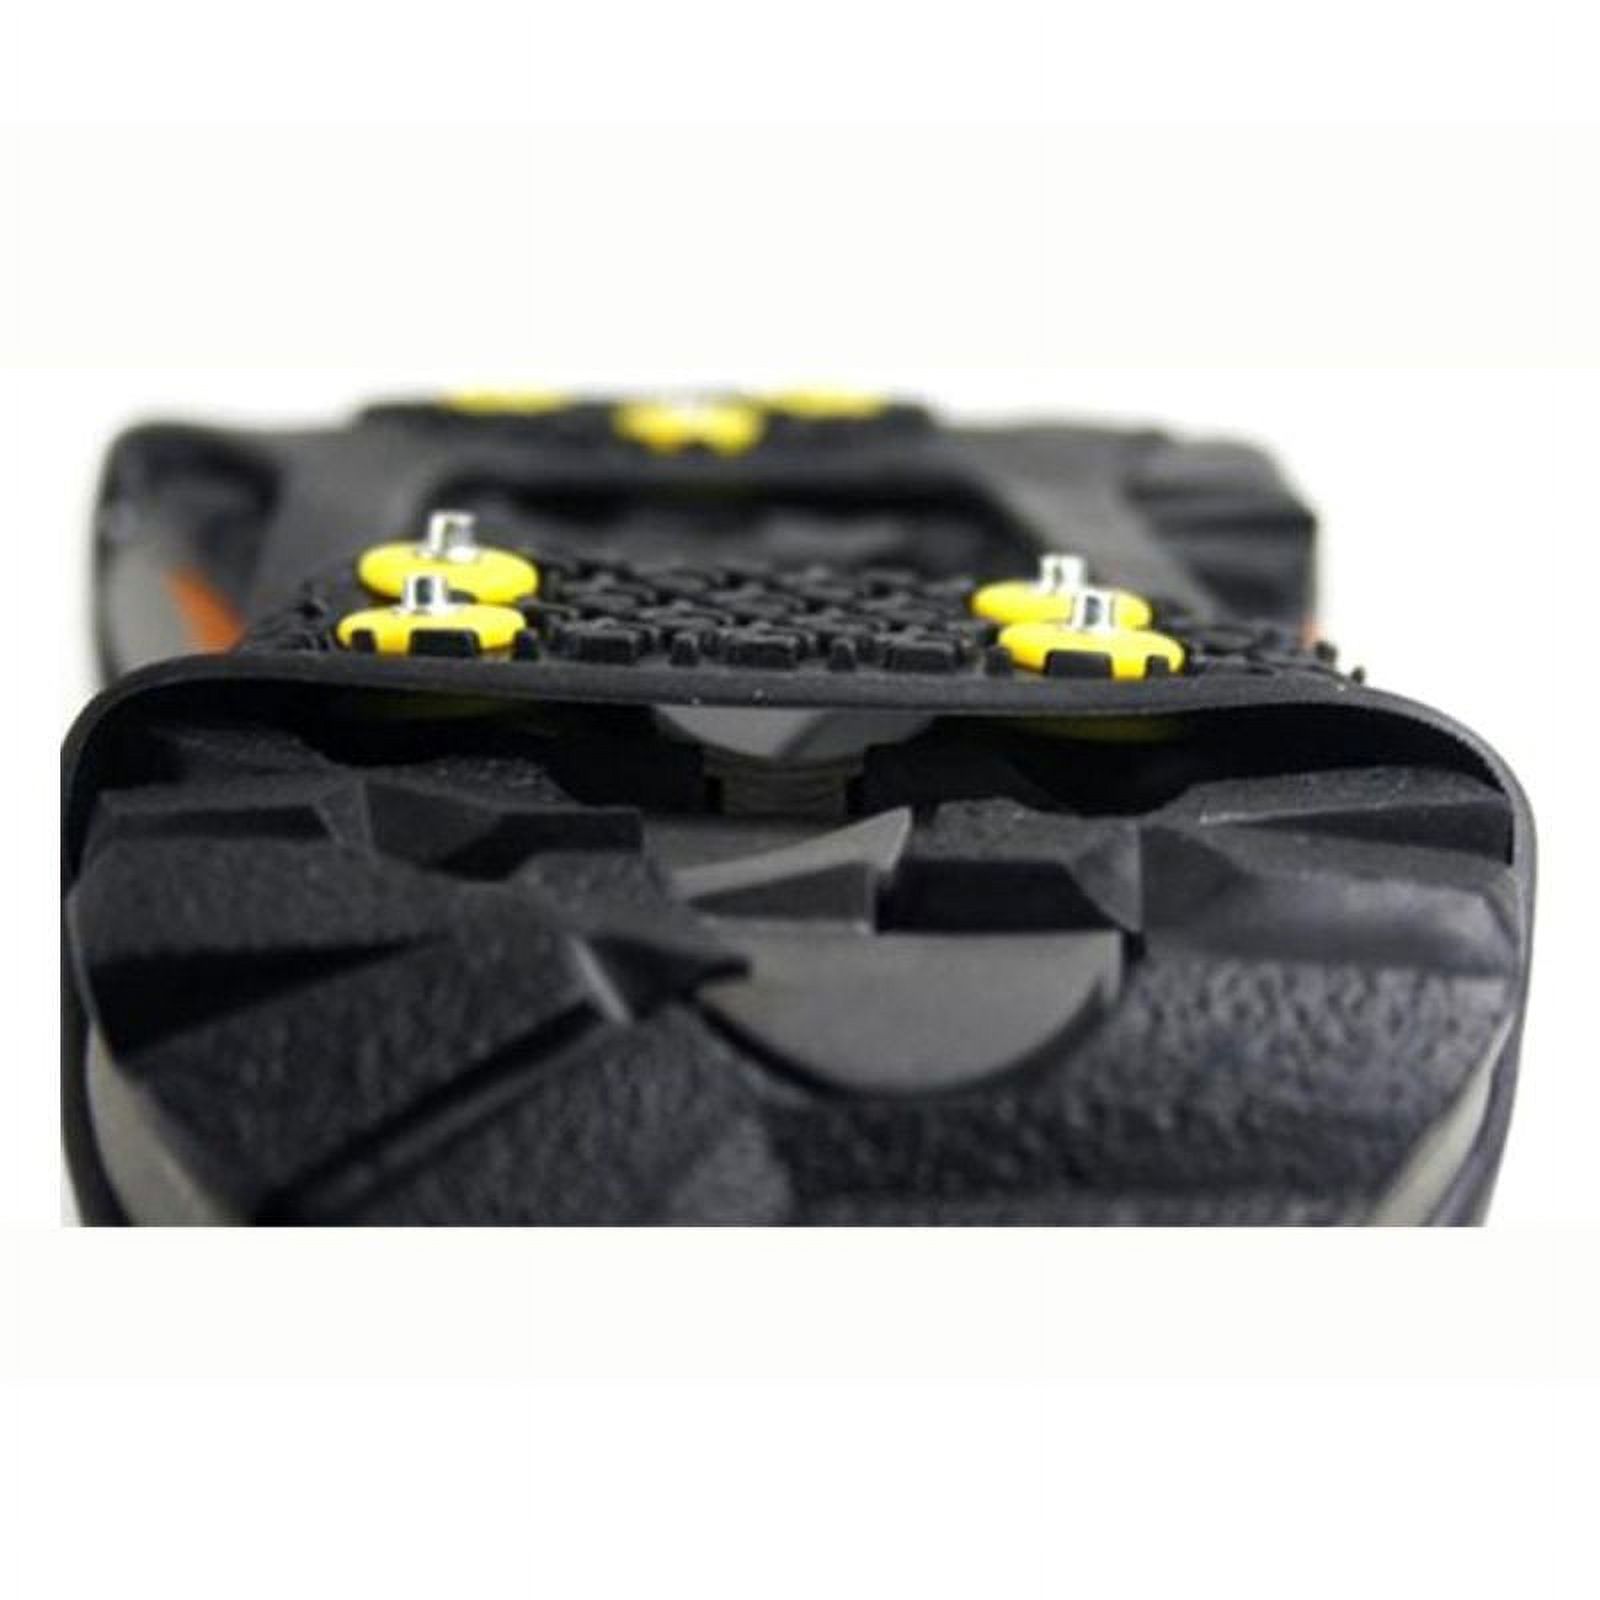 Snow Grippers Ice Cleats - Snow Grips Crampons Anti-Slip Traction Cleats Ice Grippers for Shoes and Boots - Steel Studs Slip-on Stretch Footwear for Women Men Kids - image 5 of 6